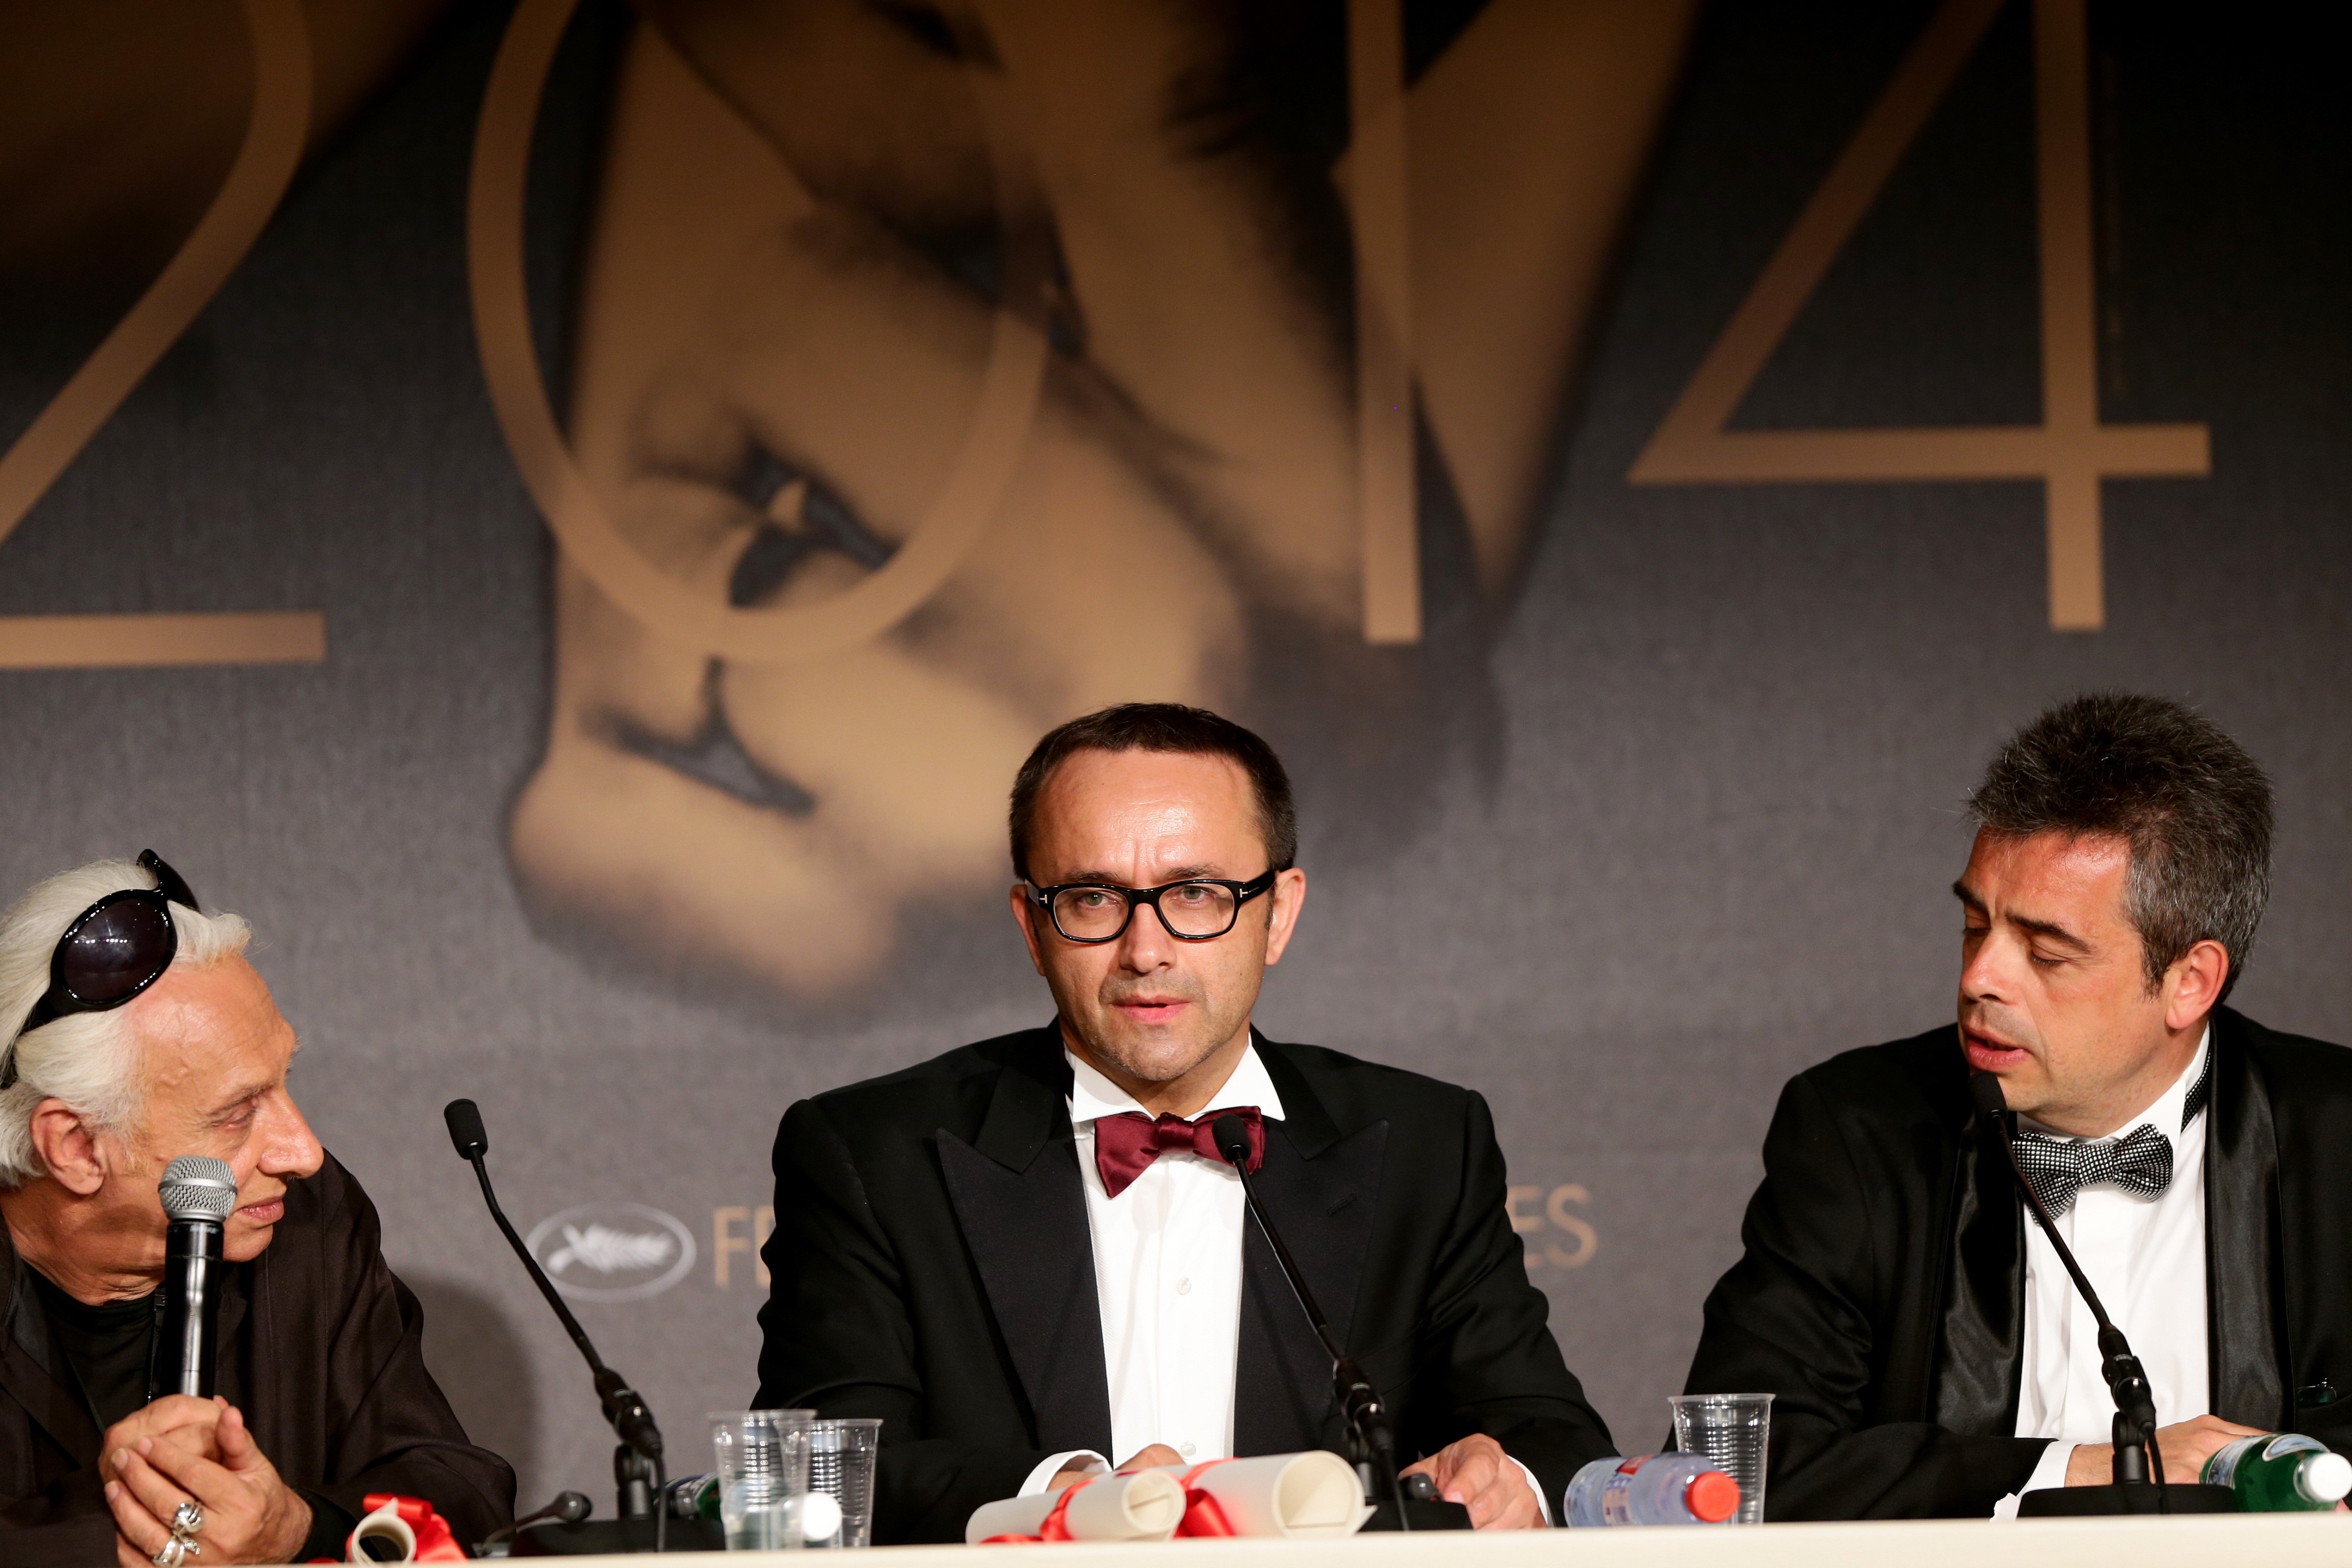 Russian director and screenwriter Andrey Zvyagintsev, center, winner of the best screenplay at the Cannes Film Festival for his film <i>Leviathan</i>, attends a press conference in Cannes, France, on May 24, 2014 (Vittorio Zunino Celotto—Getty)